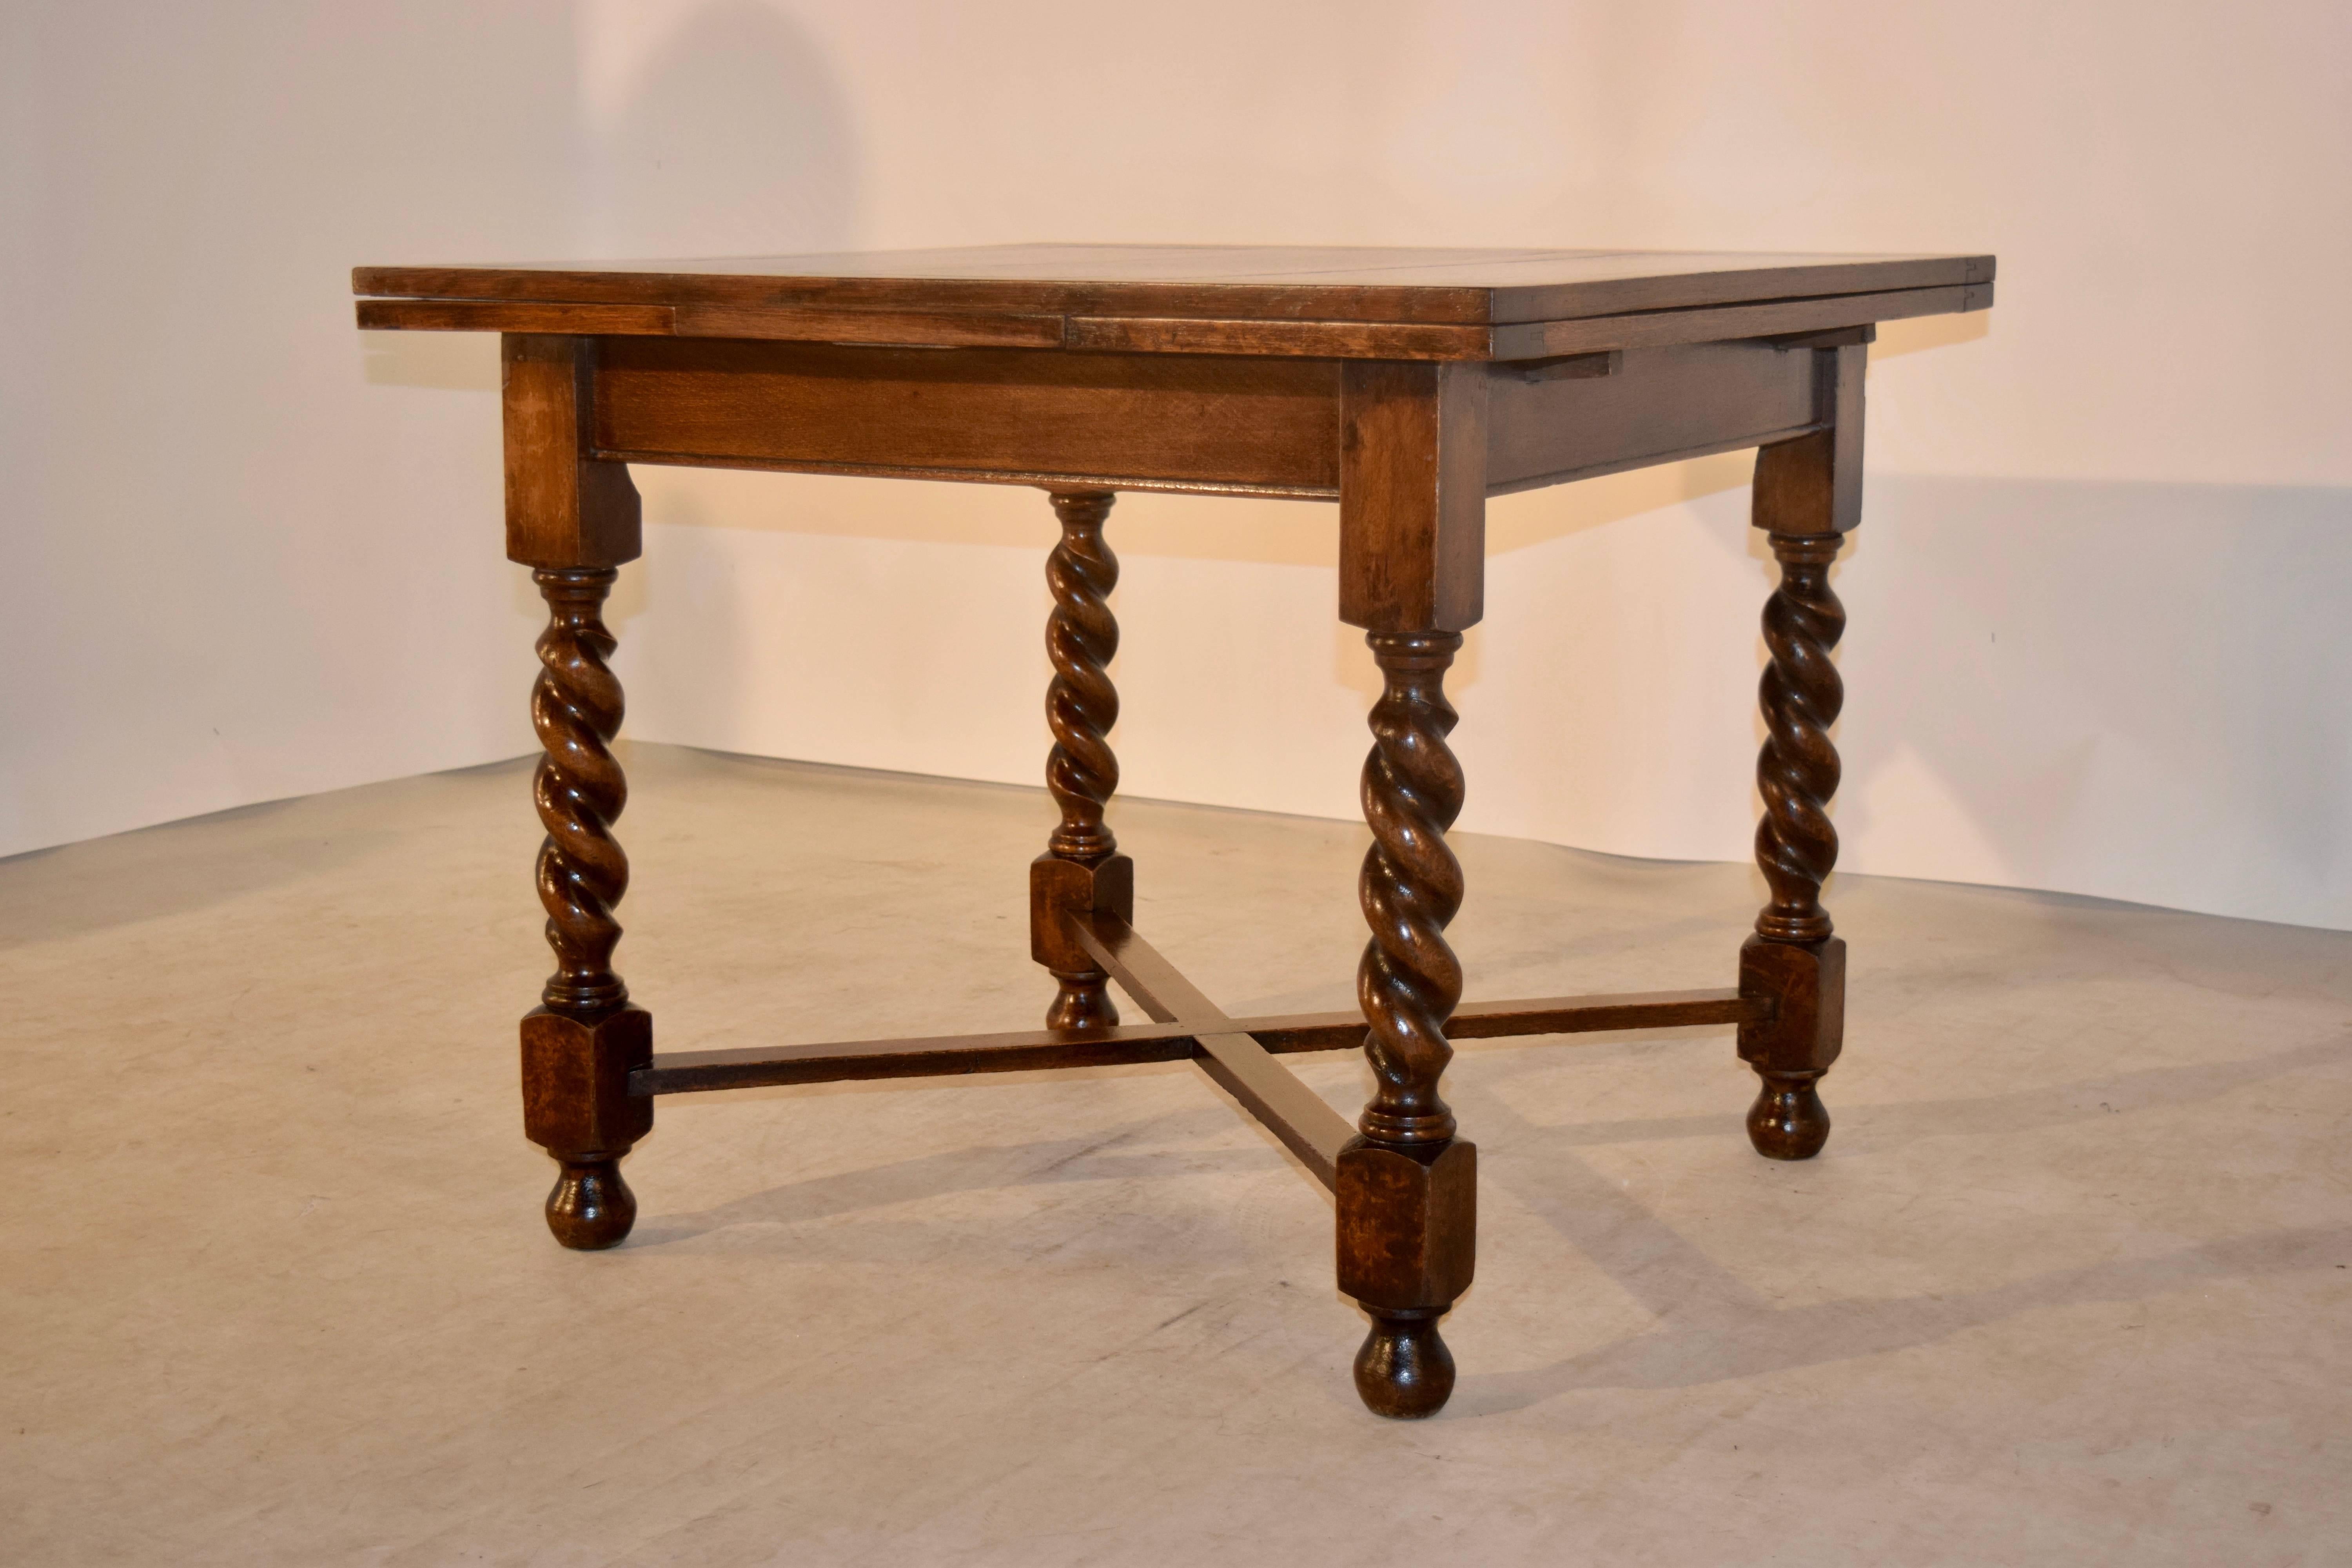 English oak draw-leaf table with paneled top and leaves, following down to a simple apron, and supported on hand turned barley twist legs, which are joined by cross stretchers and supported on turned feet, circa 1900. The top open measures 59.88 x